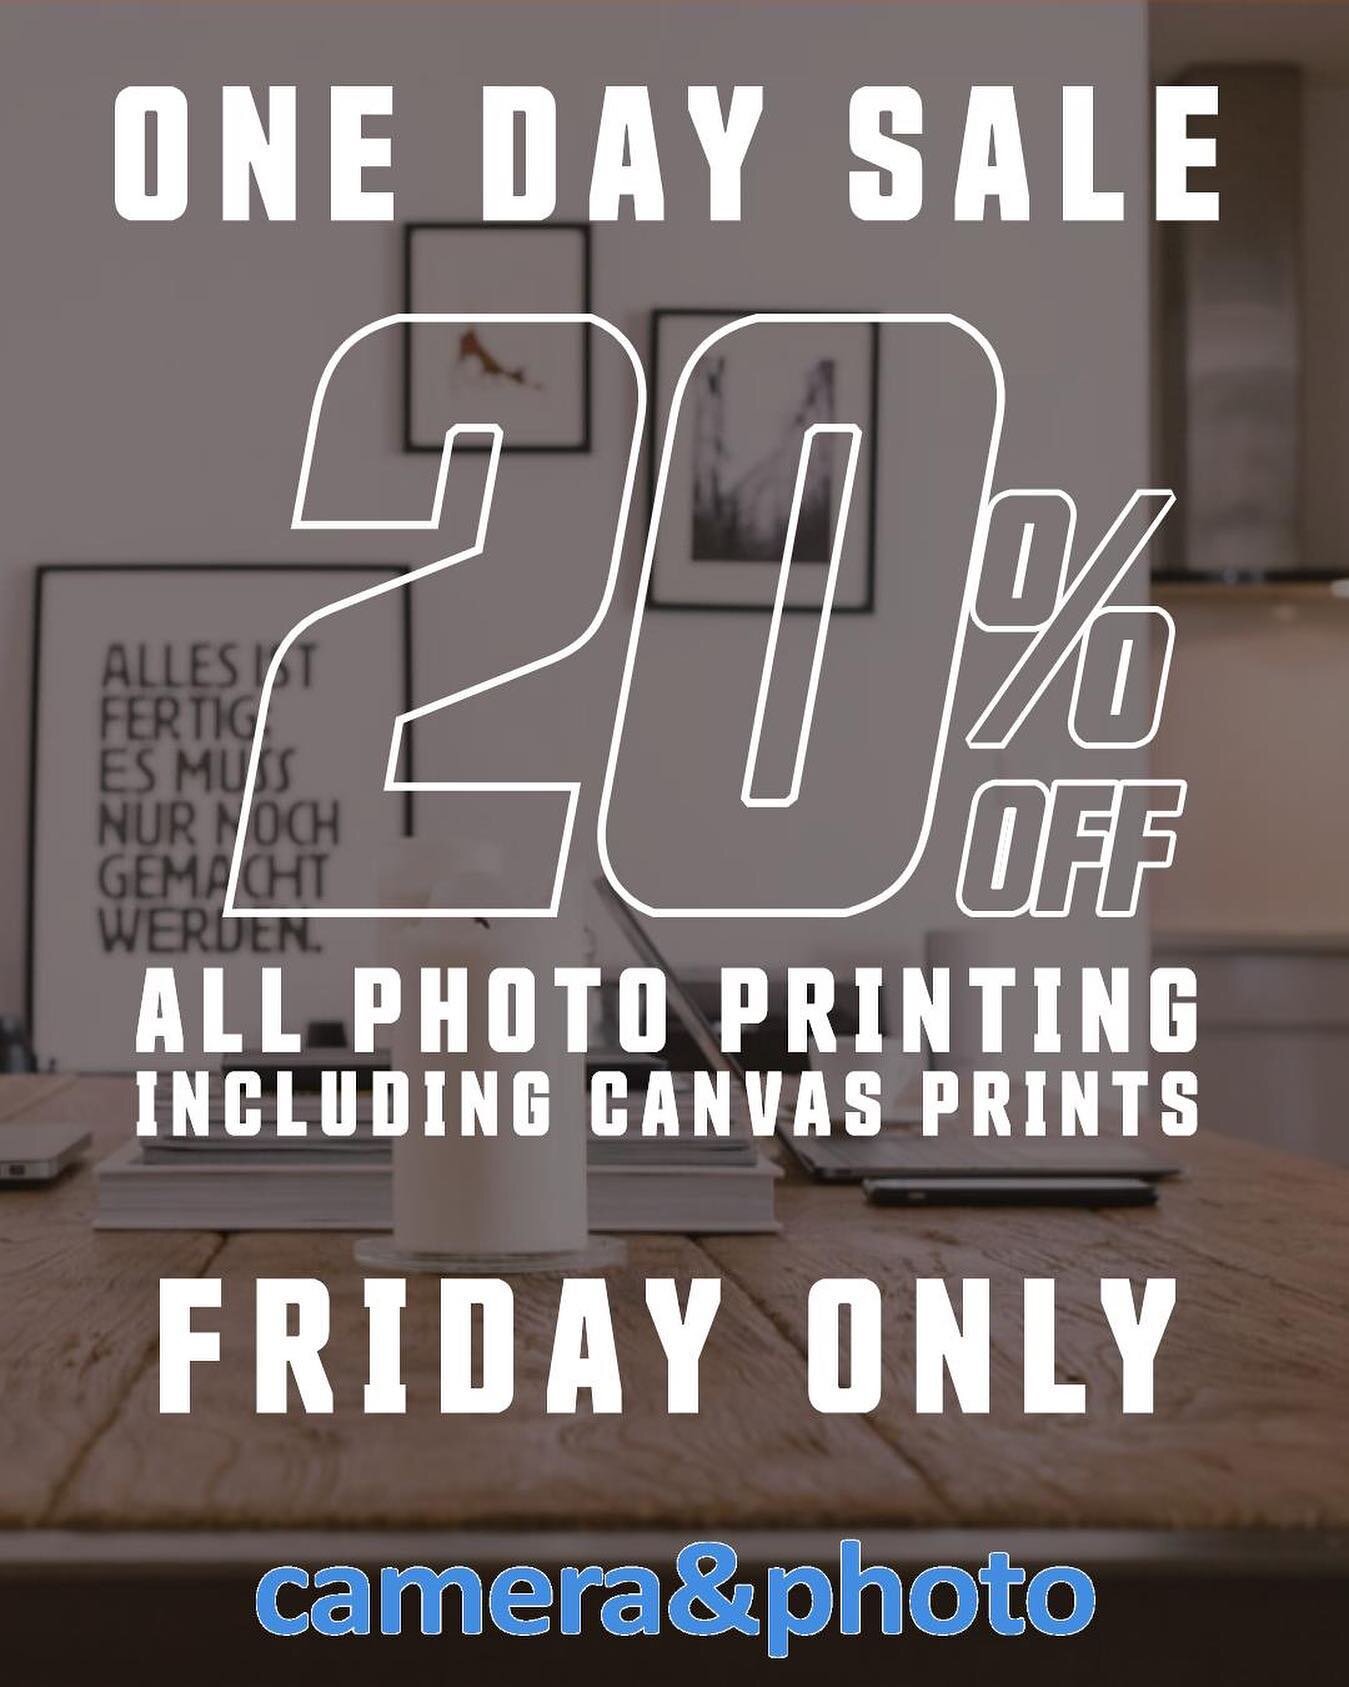 ❤️ A BARGAIN.
20% off ALL PHOTO PRINTING.
Friday only. Includes canvas prints!!!
Load up.
#print #printmaking #canvas #photographer #photography #bellarine #surfcoast